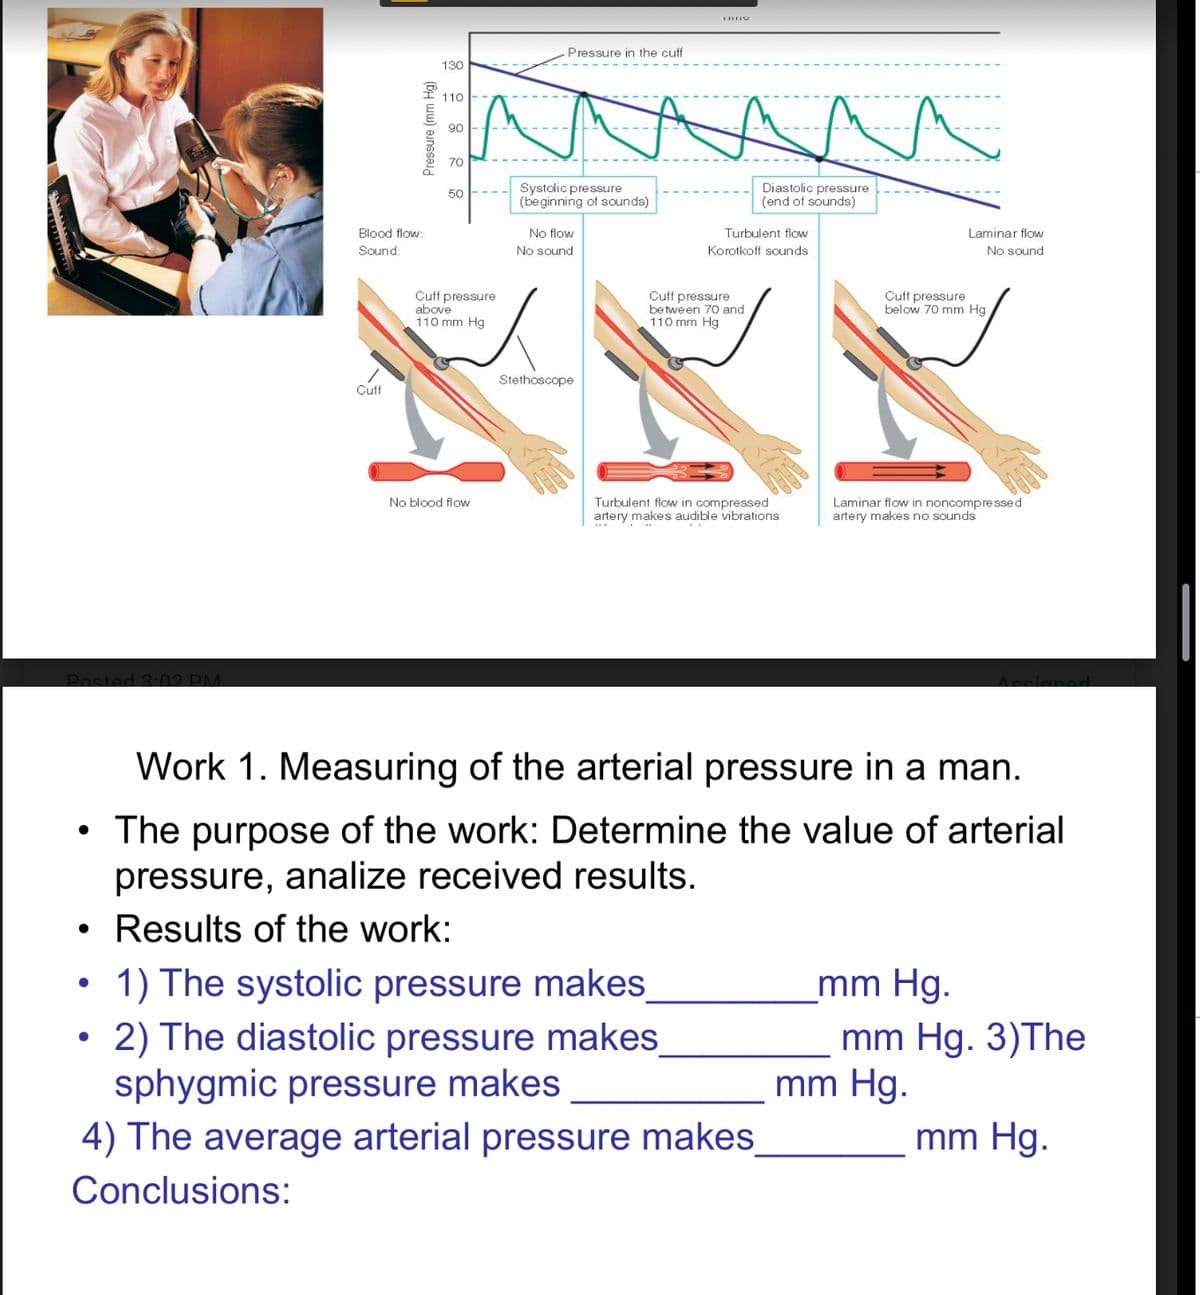 Posted 3:02 PM
●
●
●
●
Blood flow:
Sound:
Cuff
Pressure (mm Hg)
130
110
90
70
50
Cuff pressure
above
110 mm Hg
No blood flow
Pressure in the cuff
Systolic pressure
(beginning of sounds)
No flow
No sound.
Stethoscope
^^^
Diastolic pressure
(end of sounds)
Turbulent flow
Korotkoff sounds
Cuff pressure
between 70 and
110 mm Hg
Turbulent flow in compressed
artery makes audible vibrations
1) The systolic pressure makes
2) The diastolic pressure makes
sphygmic pressure makes
4) The average arterial pressure makes_
Conclusions:
Cuff pressure
below 70 mm Hg,
Work 1. Measuring of the arterial pressure in a man.
The purpose of the work: Determine the value of arterial
pressure, analize received results.
Results of the work:
Laminar flow
No sound
Laminar flow in noncompressed
artery makes no sounds
mm Hg.
mm Hg. 3)The
mm Hg.
mm Hg.